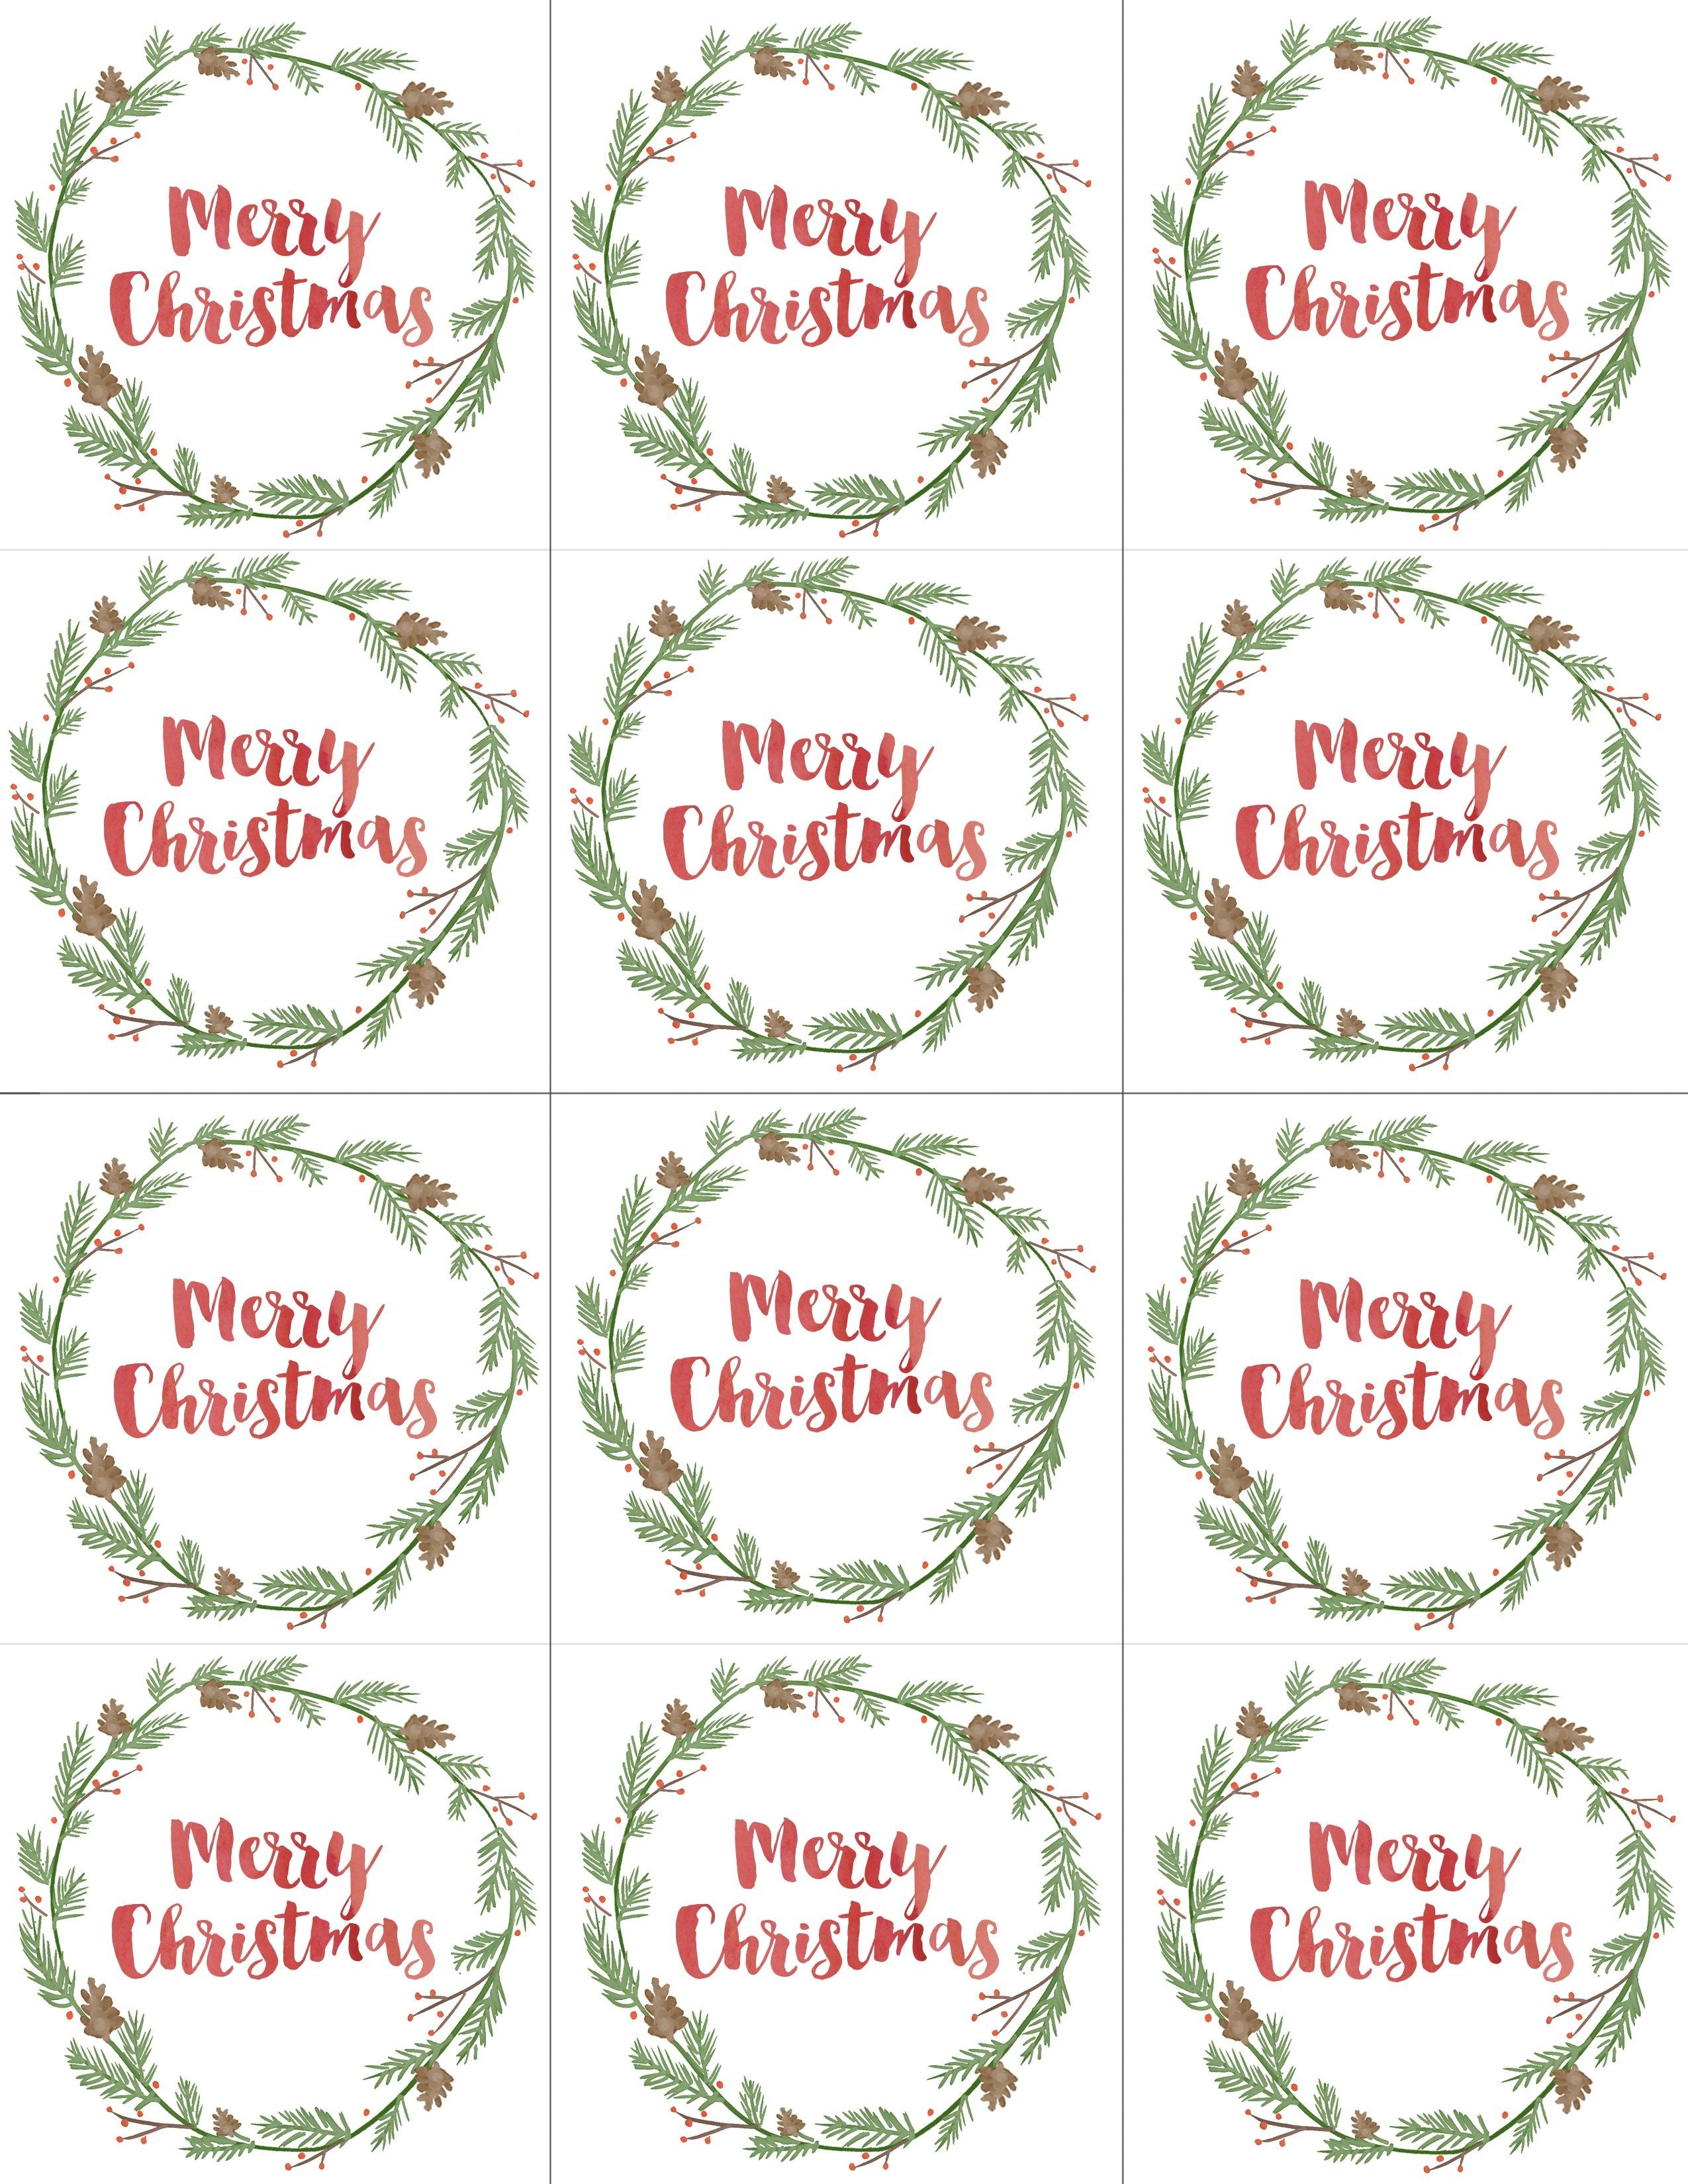 Hand Painted Gift Tags Free Printable | Christmas | Christmas Gift - Printable Gift Tags Customized Free